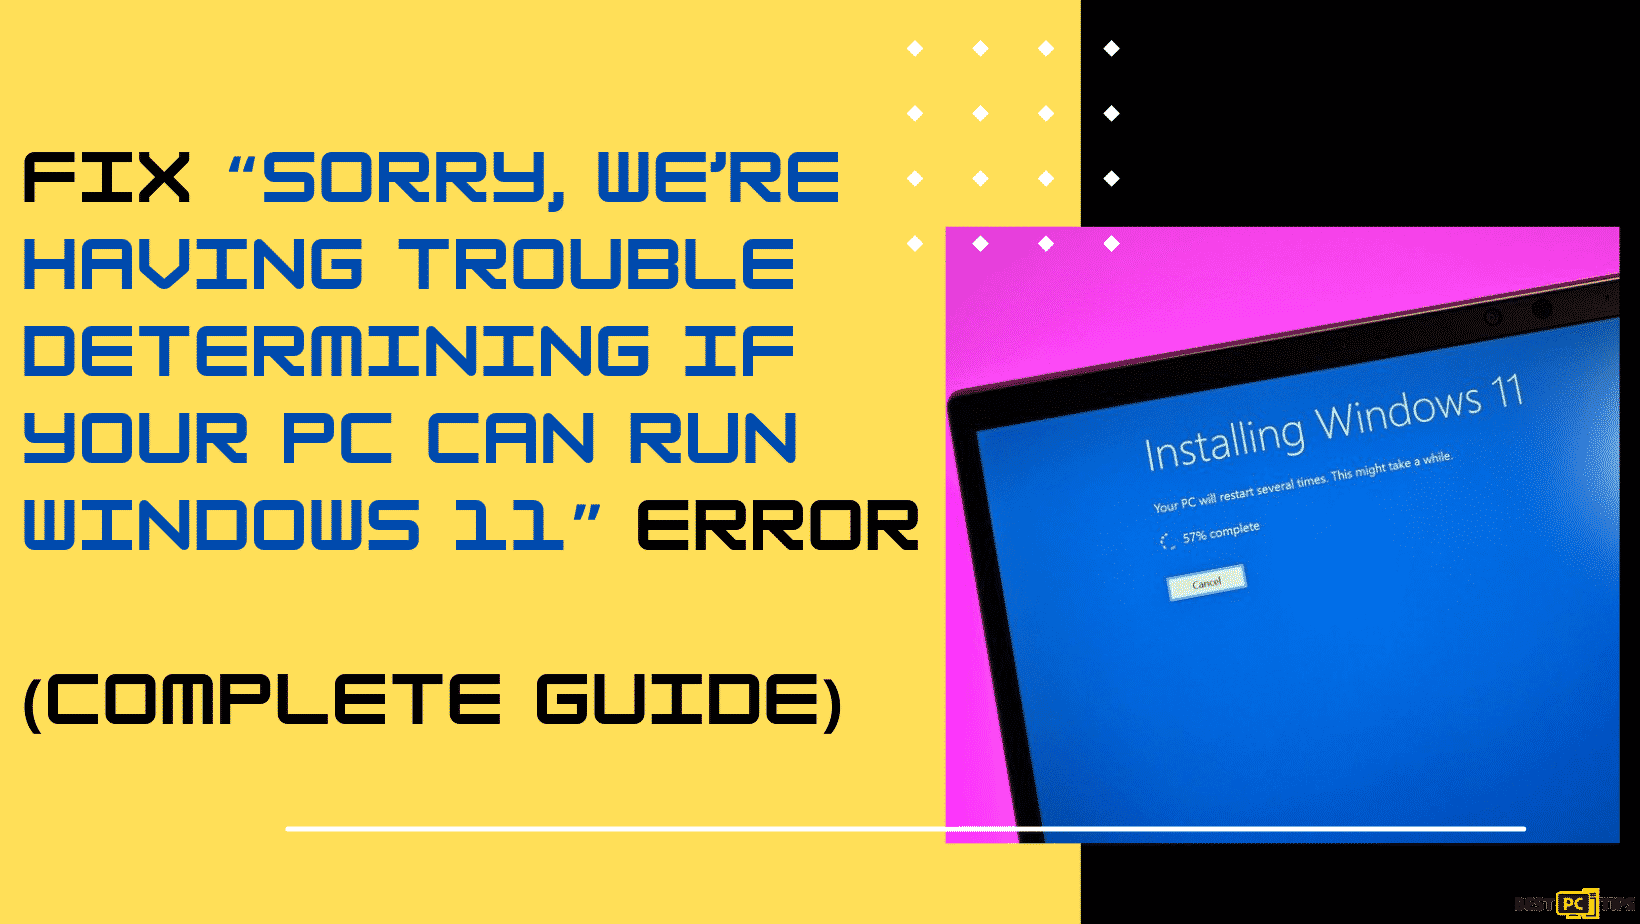 Fix Sorry, we’re having trouble determining if your PC can run Windows 11